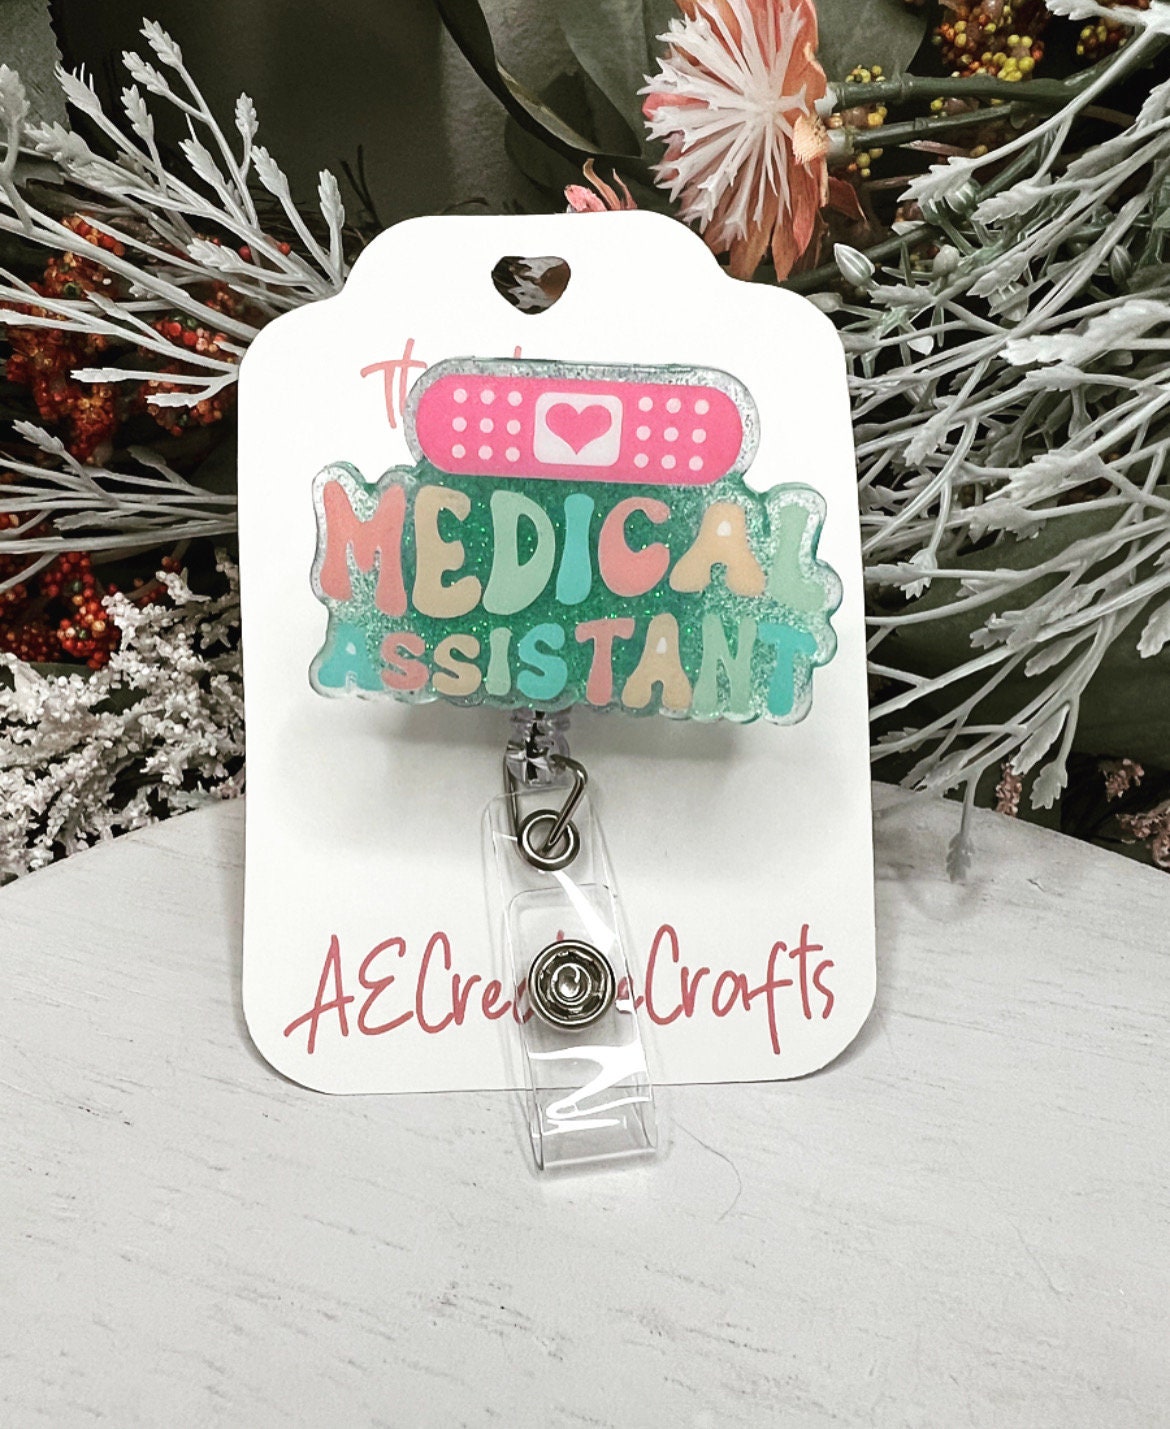 MA Life Badge Reel Medical Assistant Assisting Hospital Doctor Office  Holographic Made to Order Custom You Design 